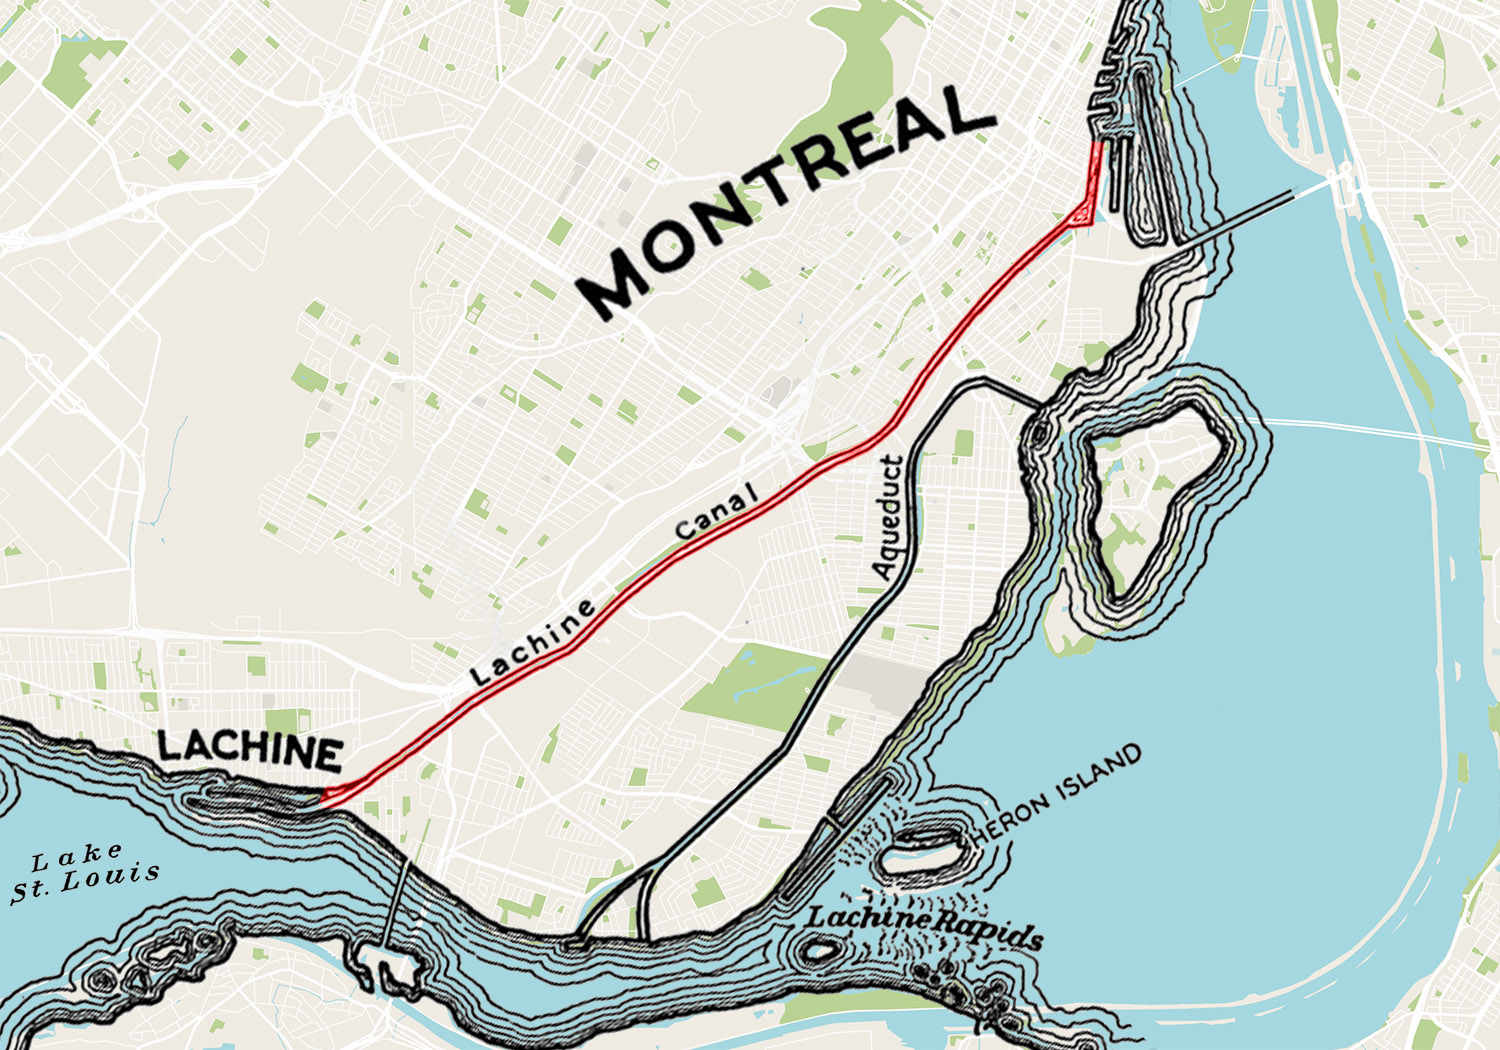 An old drawing of the Lachine Canal overlaid on a modern map of Montreal.